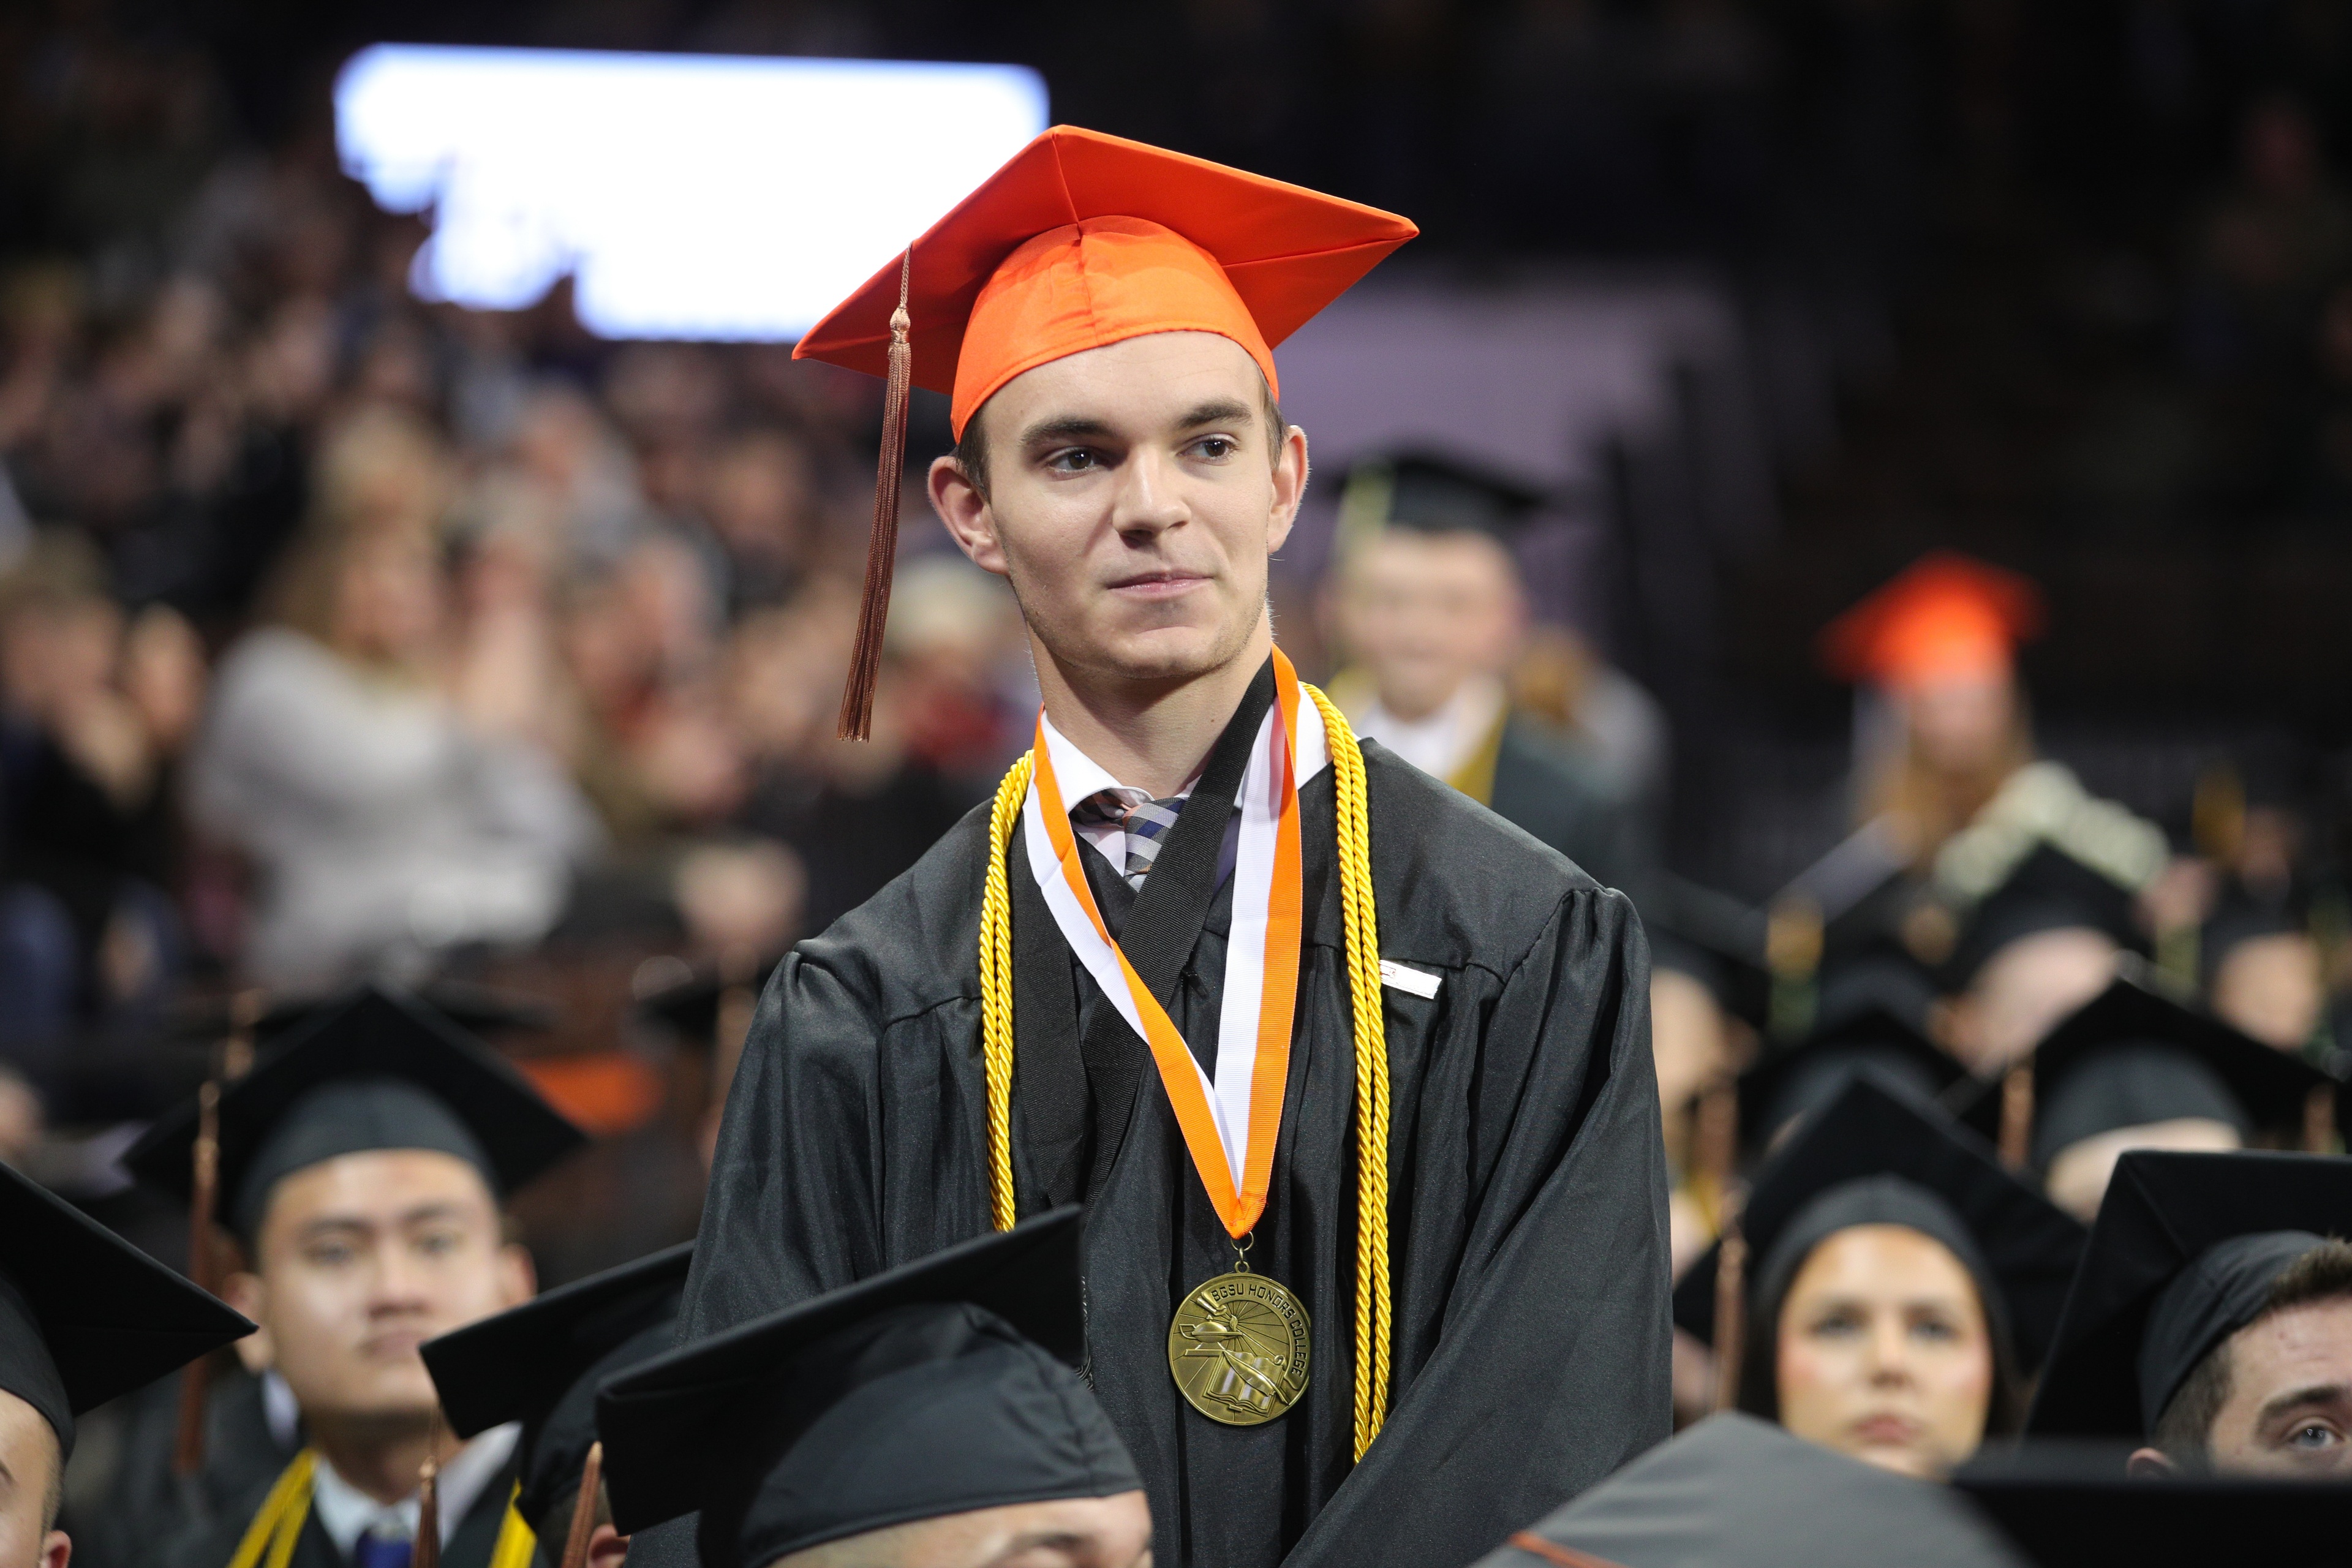 A BGSU Honors College graduate stands to be recognized for academic achievement